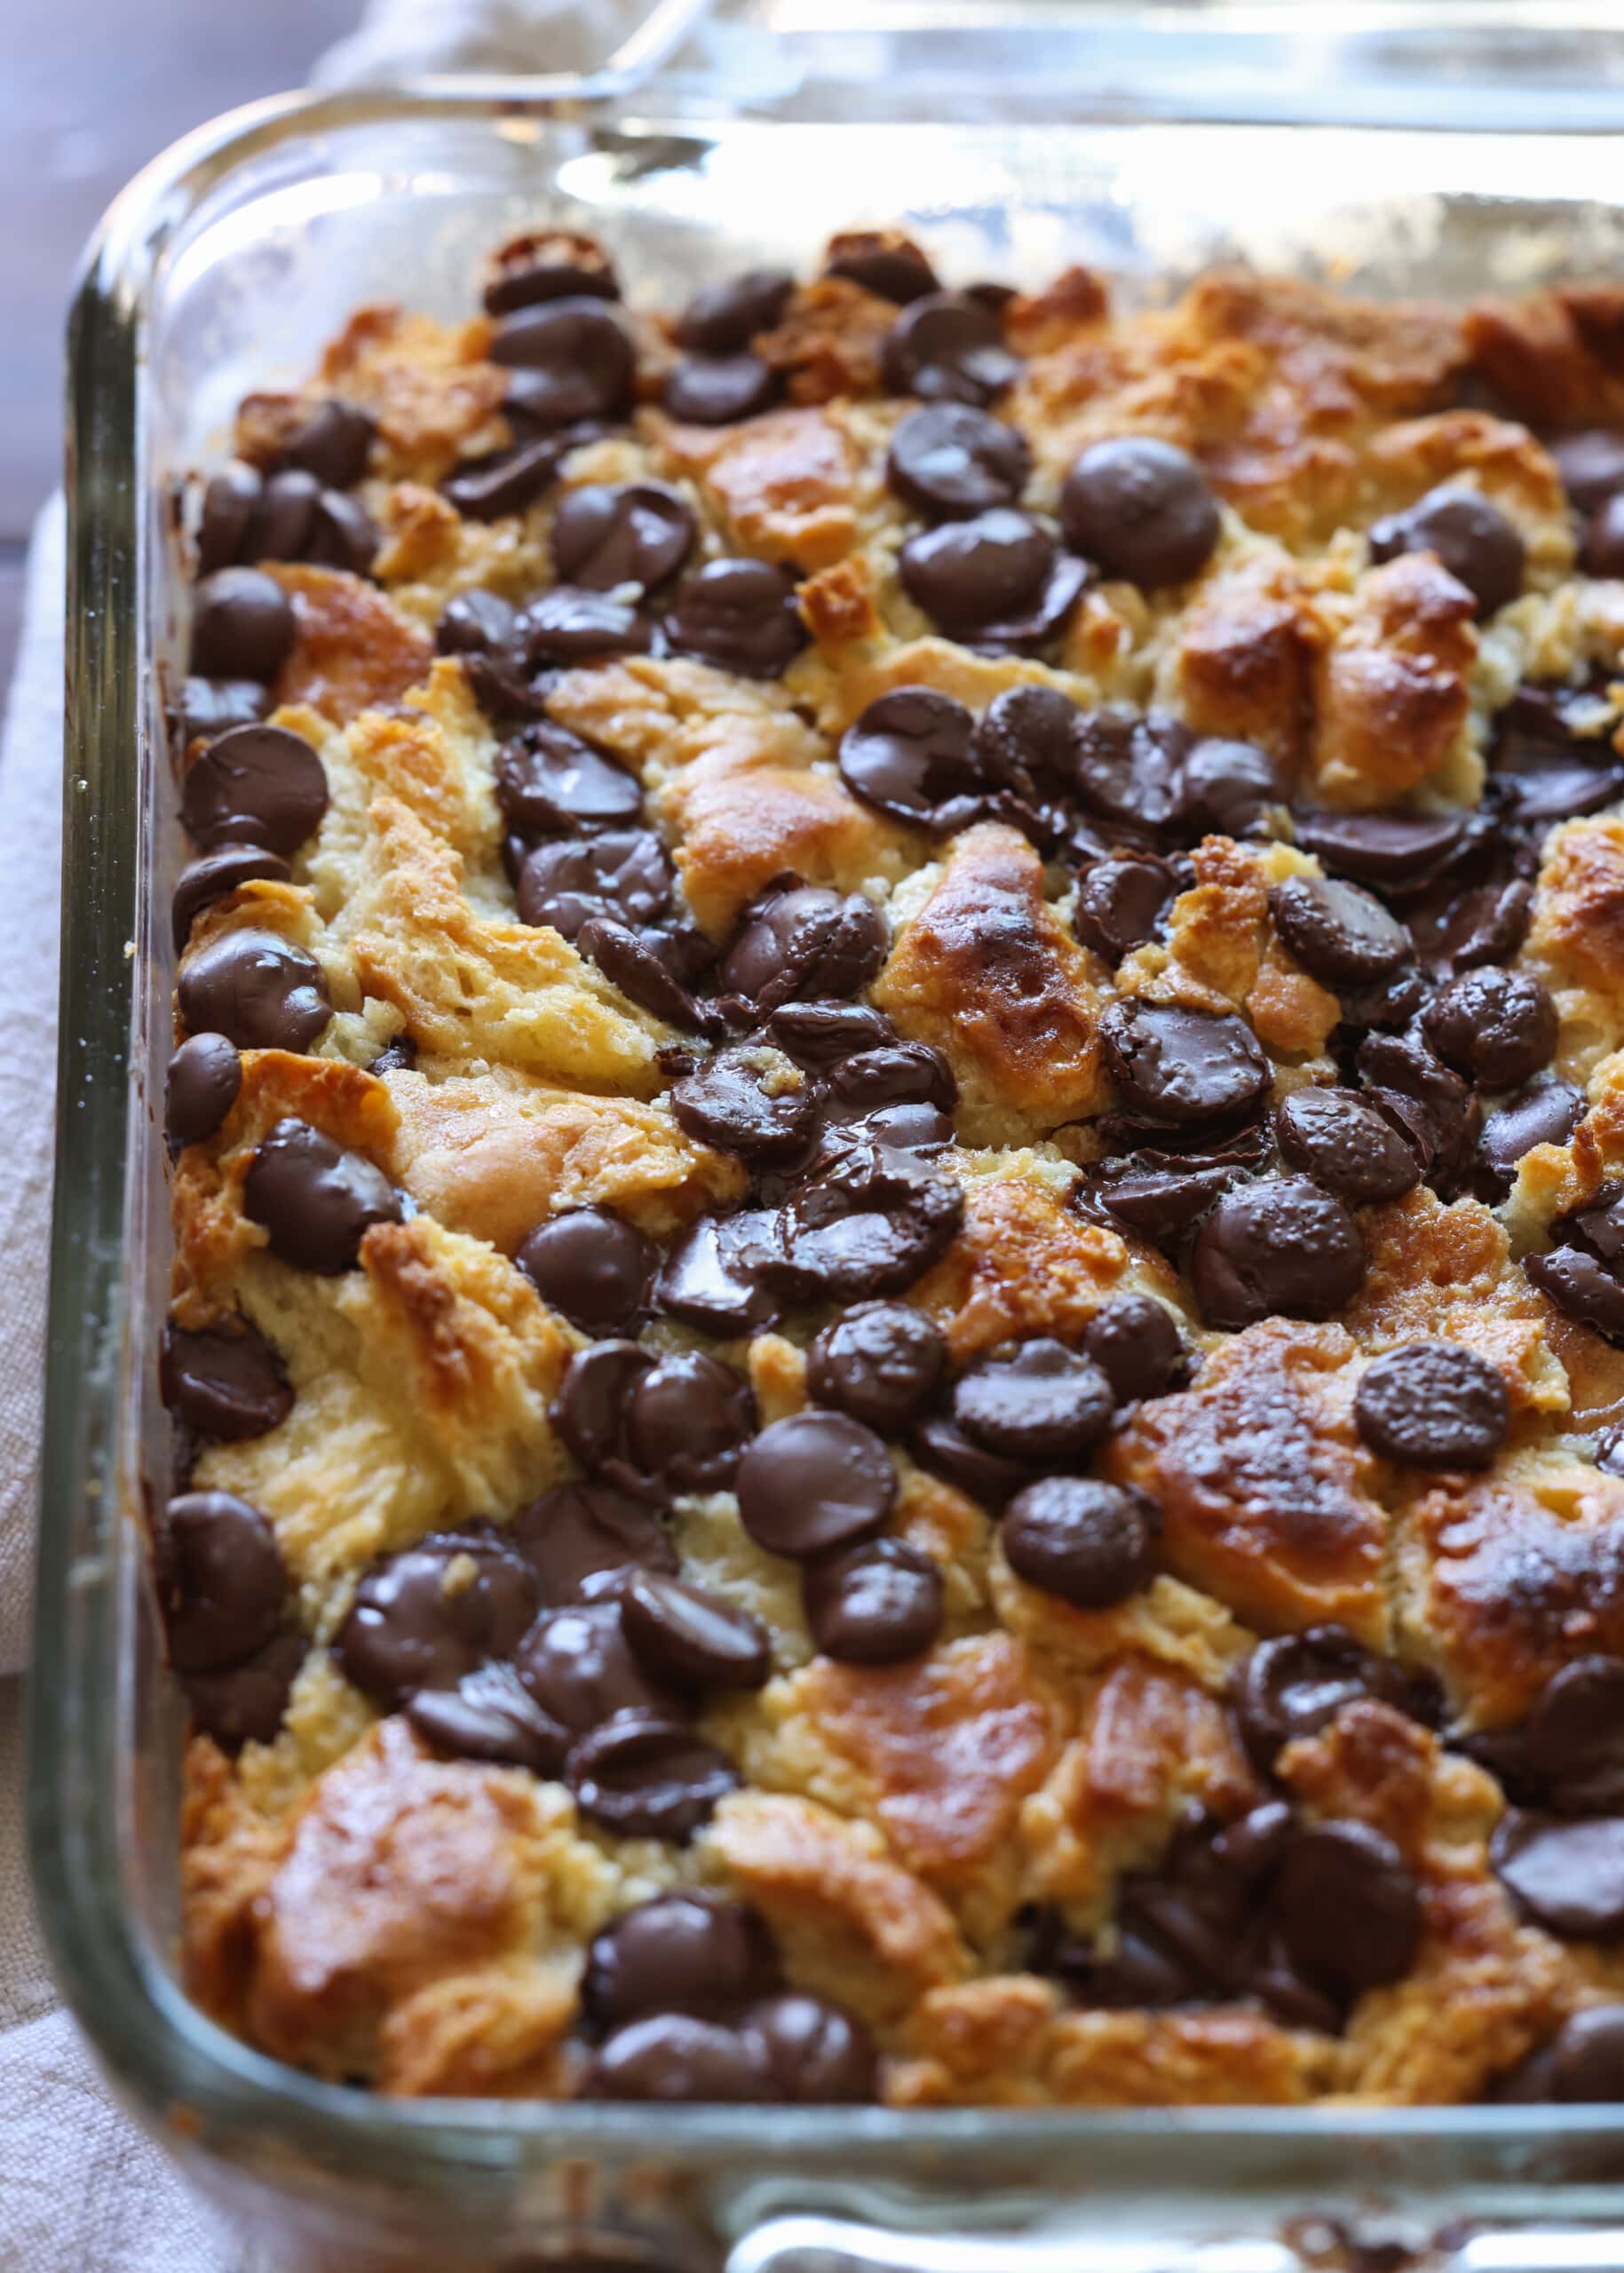 Bread pudding made from biscuits topped with chocolate chips and baked in an 8x8 mold.